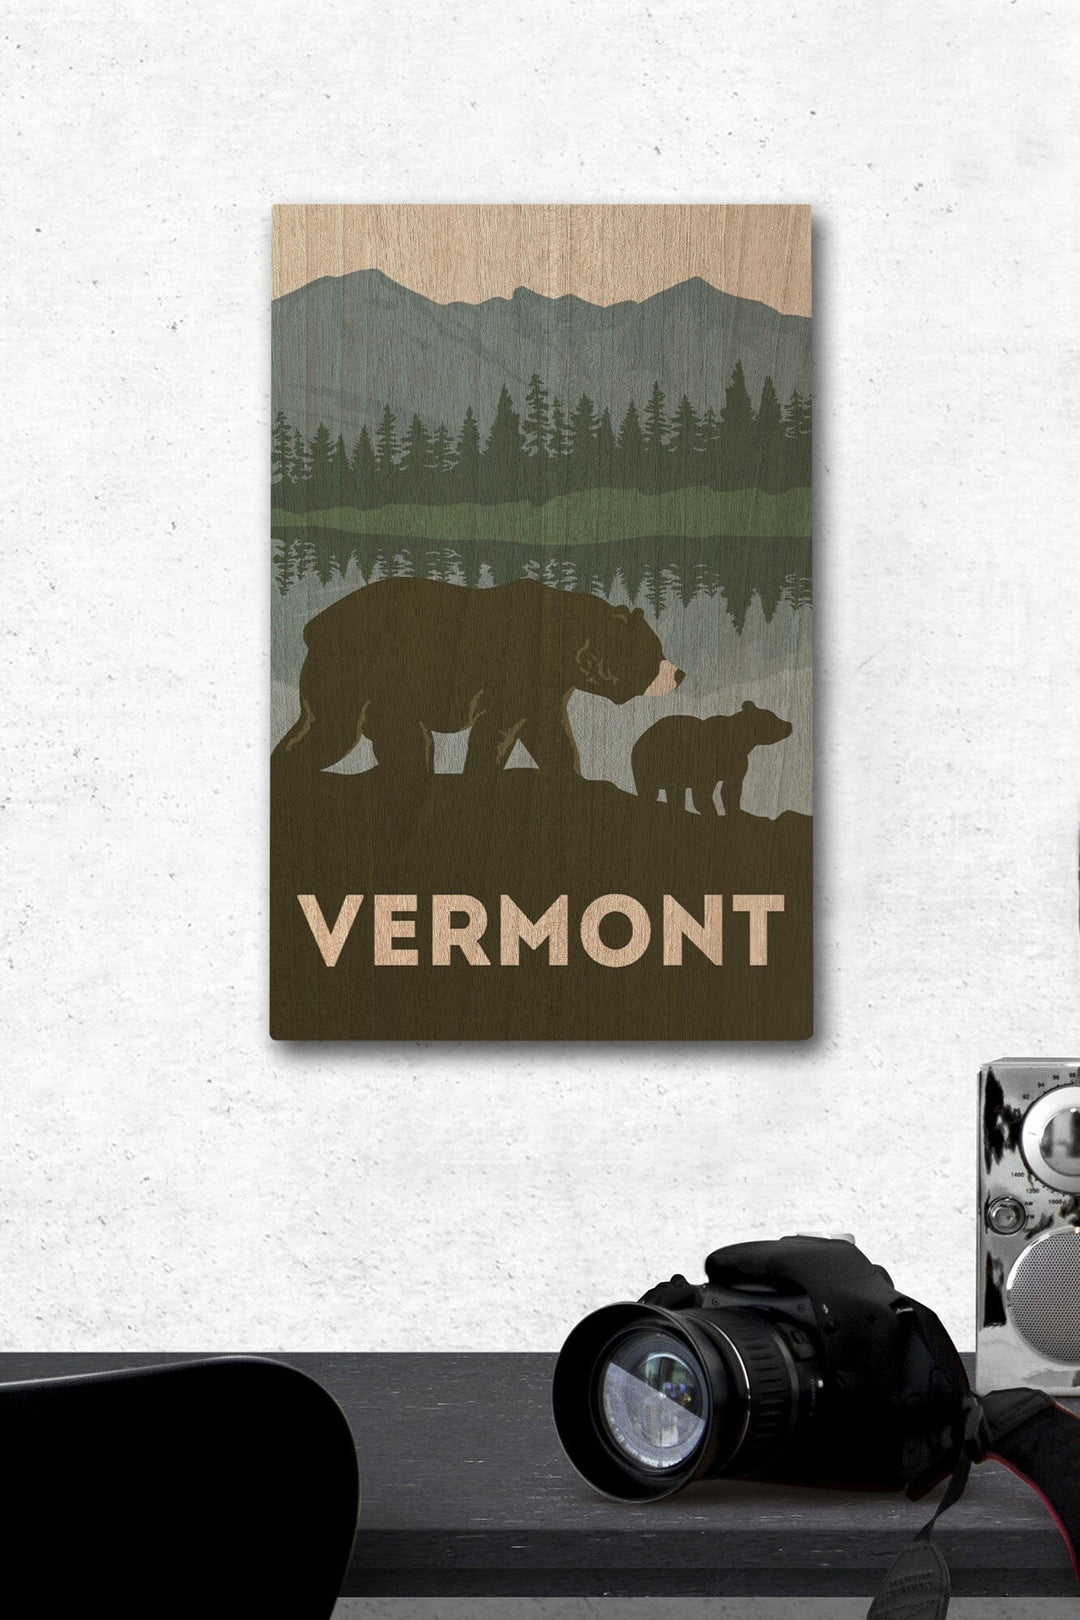 Vermont, Grizzly Bear, Vector, Lantern Press Artwork, Wood Signs and Postcards Wood Lantern Press 12 x 18 Wood Gallery Print 